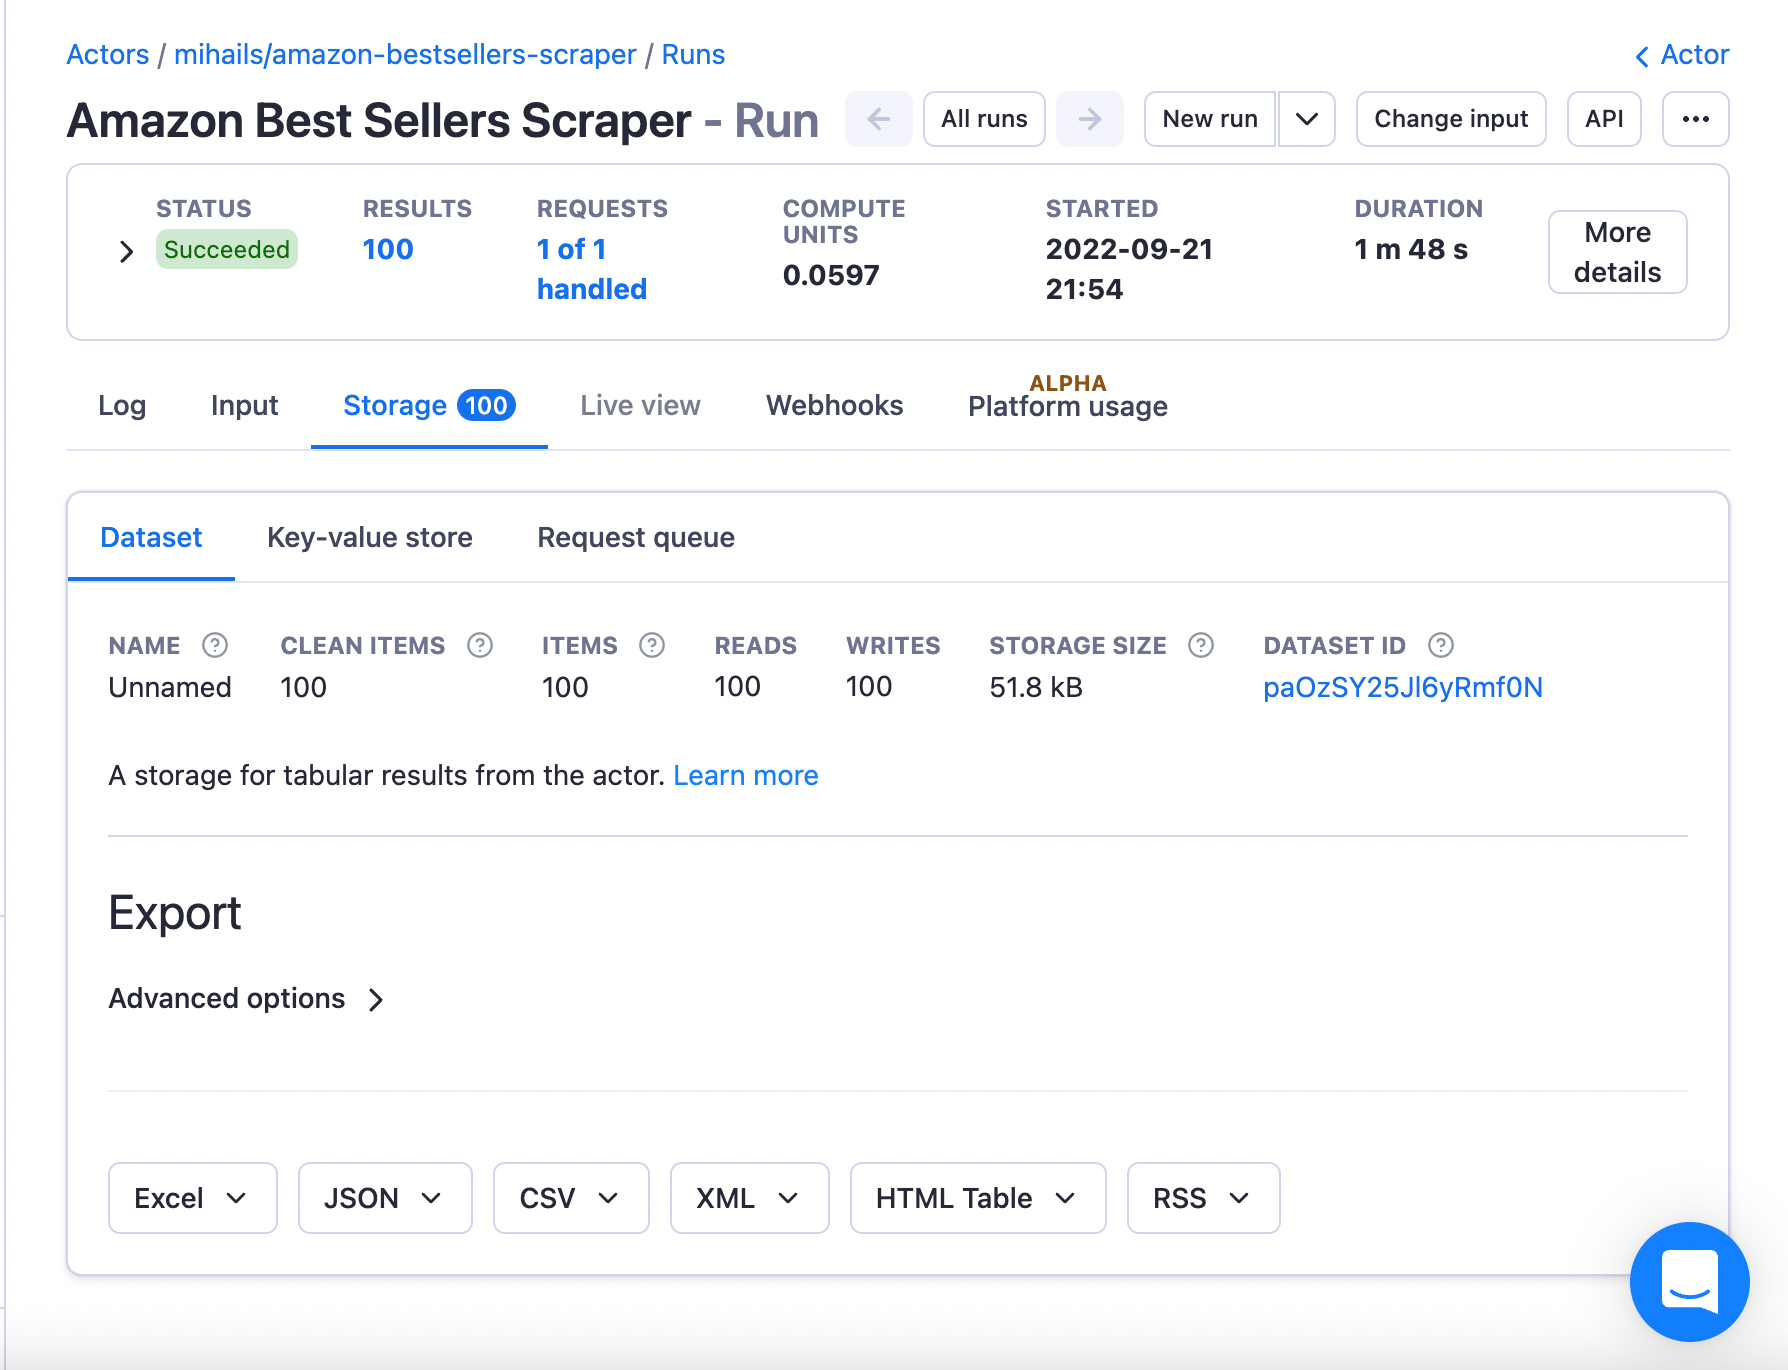 With Amazon Best Sellers Scraper extracting Amazon data takes only a few minutes